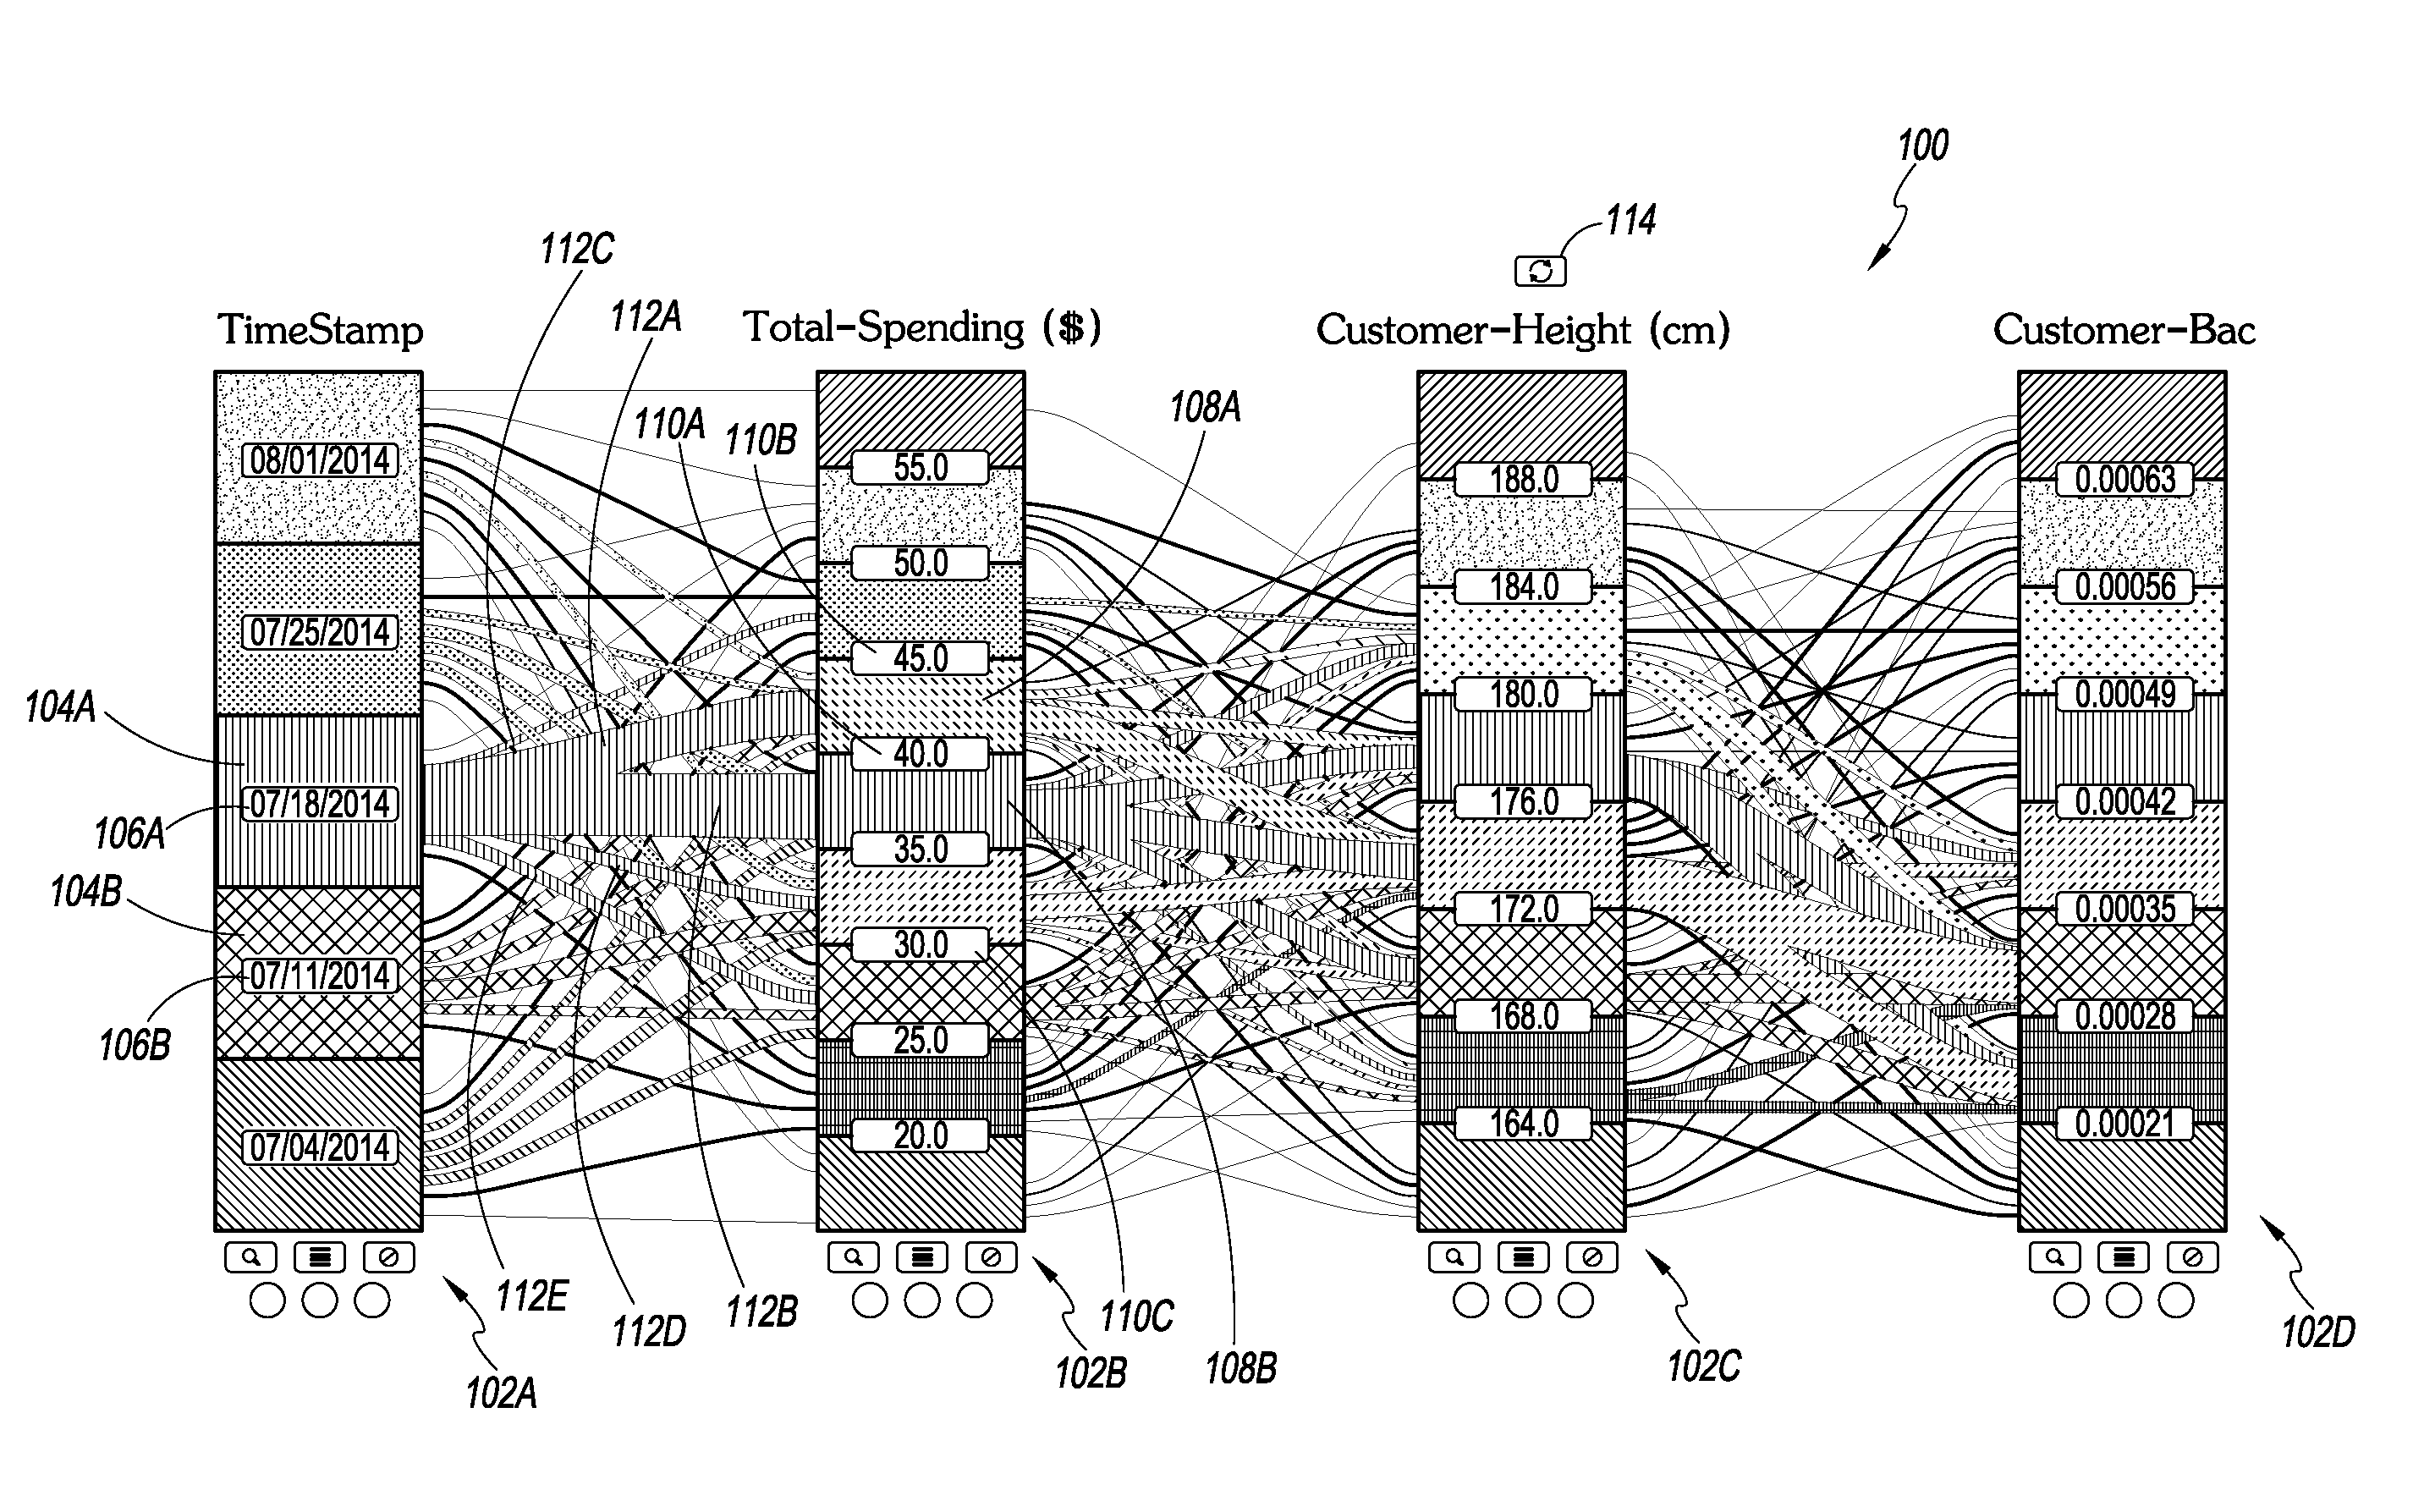 Presentation of multivariate data on a graphical user interface of a computing system